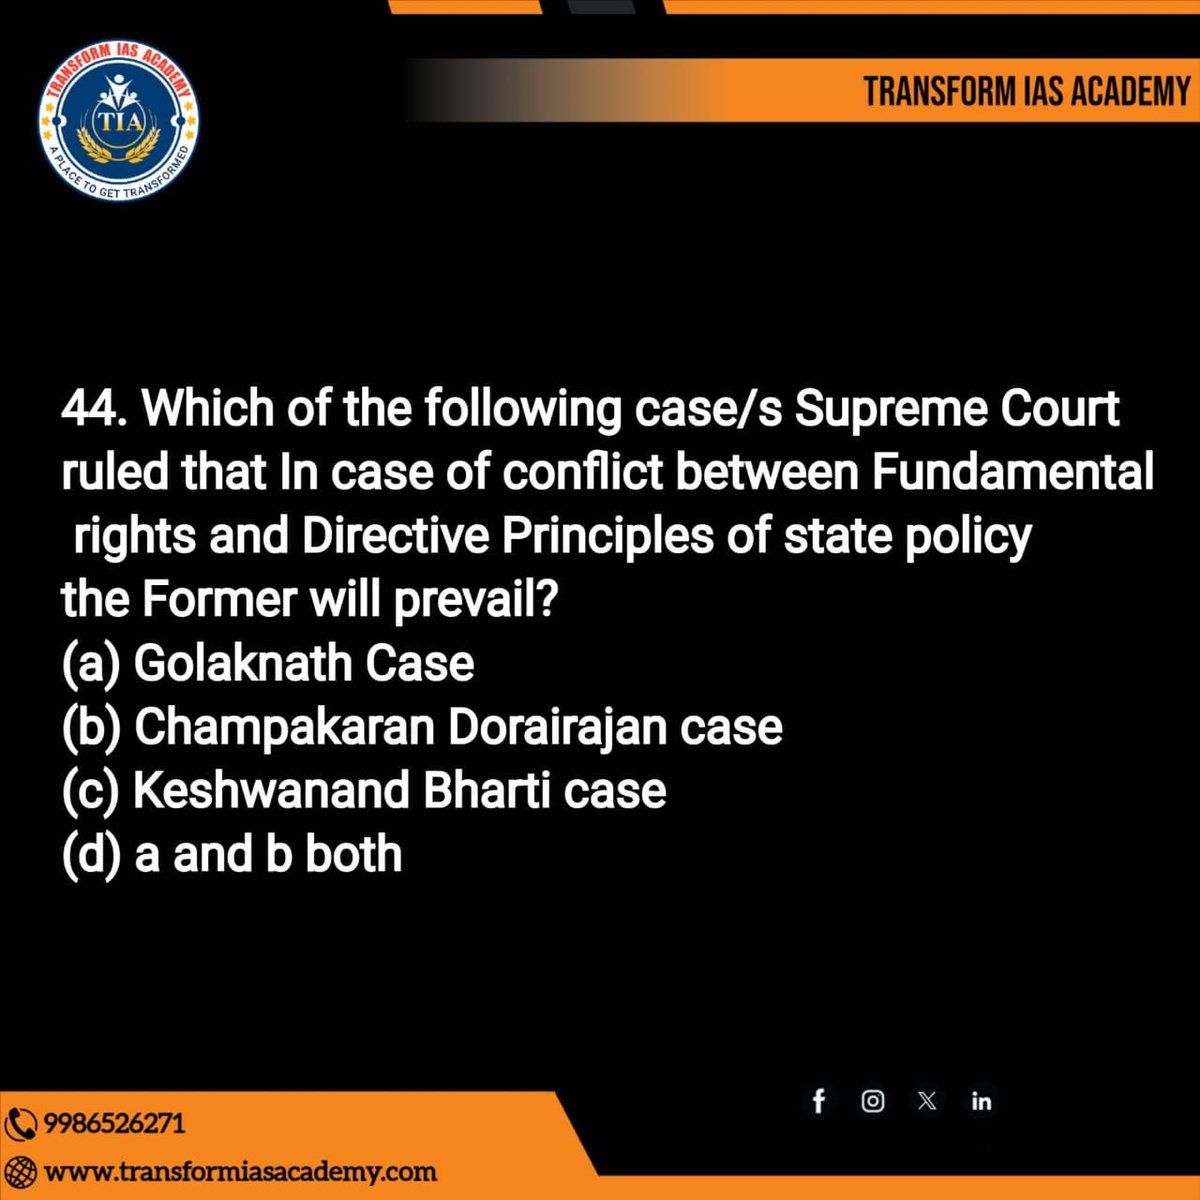 PPQ - 'Prelims Practice Questions' Ncert's
Comment your answers below 👇
.
.
#upsc #ias #ssc #currentaffairs #ips #gk #rrb #ifs  #UPSC #ias #ips #upsc2023 #upsc2024 #upscprelims #upscpreparation #upscexam #upscquestions #upscsyllabus #UPSC #UPSCPrelims2024 #transformiasacademy